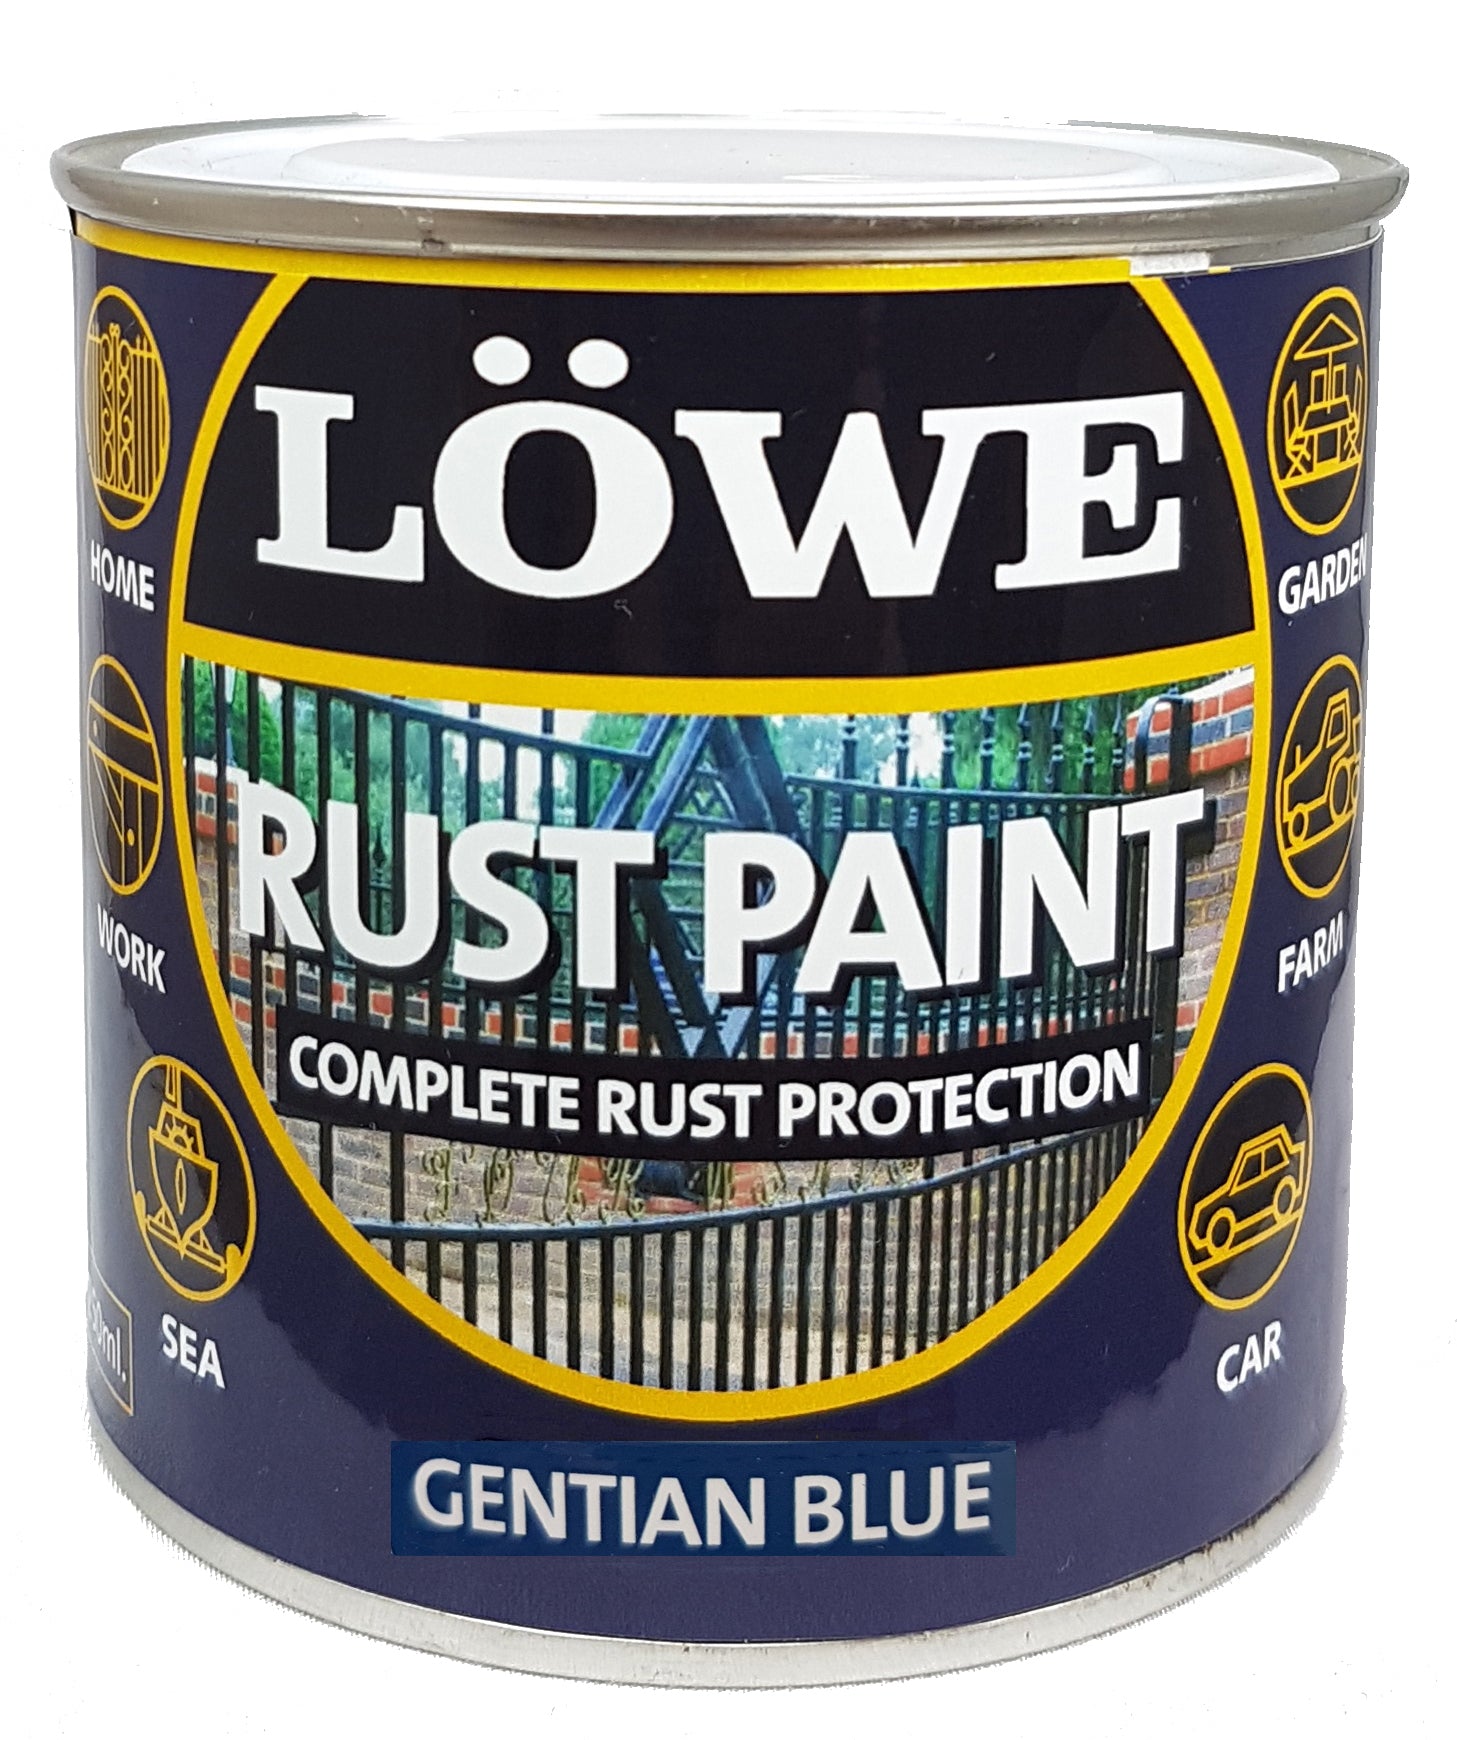 LOWE RUST PROTECTION PAINT 500ml